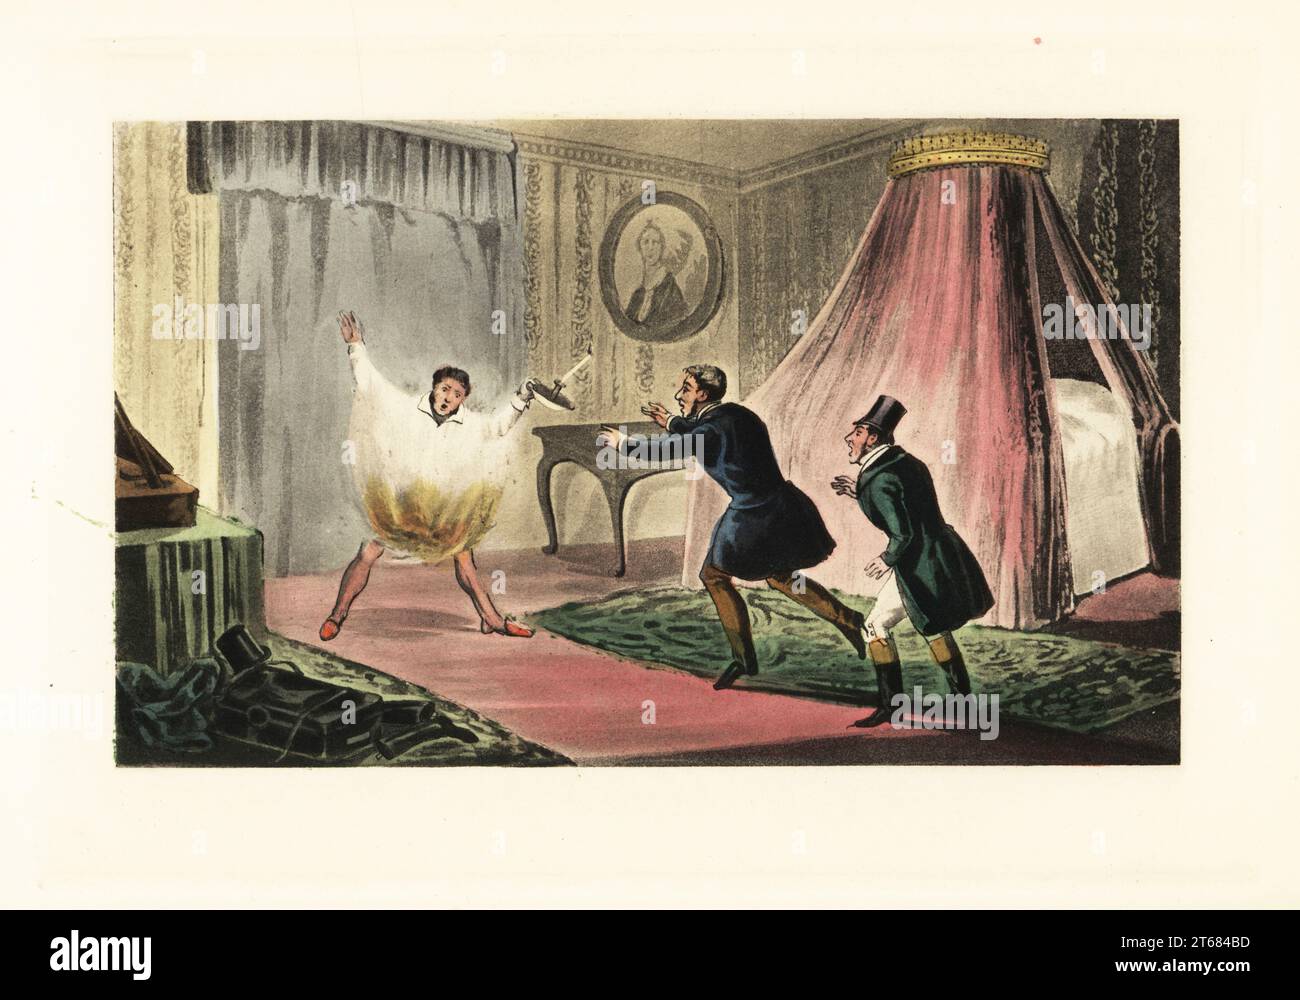 English gentleman lighting his nightshirt on fire with a candle. John Mytton, drunk, tried to cure his hiccoughs by setting his clothes on fire. He was saved by two men in his bedroom. Damn this hiccup! Chromolithographic facsimile of an illustration by Henry Thomas Alken from Memoirs of the Life of the Late John Mytton by Nimrod aka Charles James Apperley, Kegan Paul, London, 1900. Stock Photo